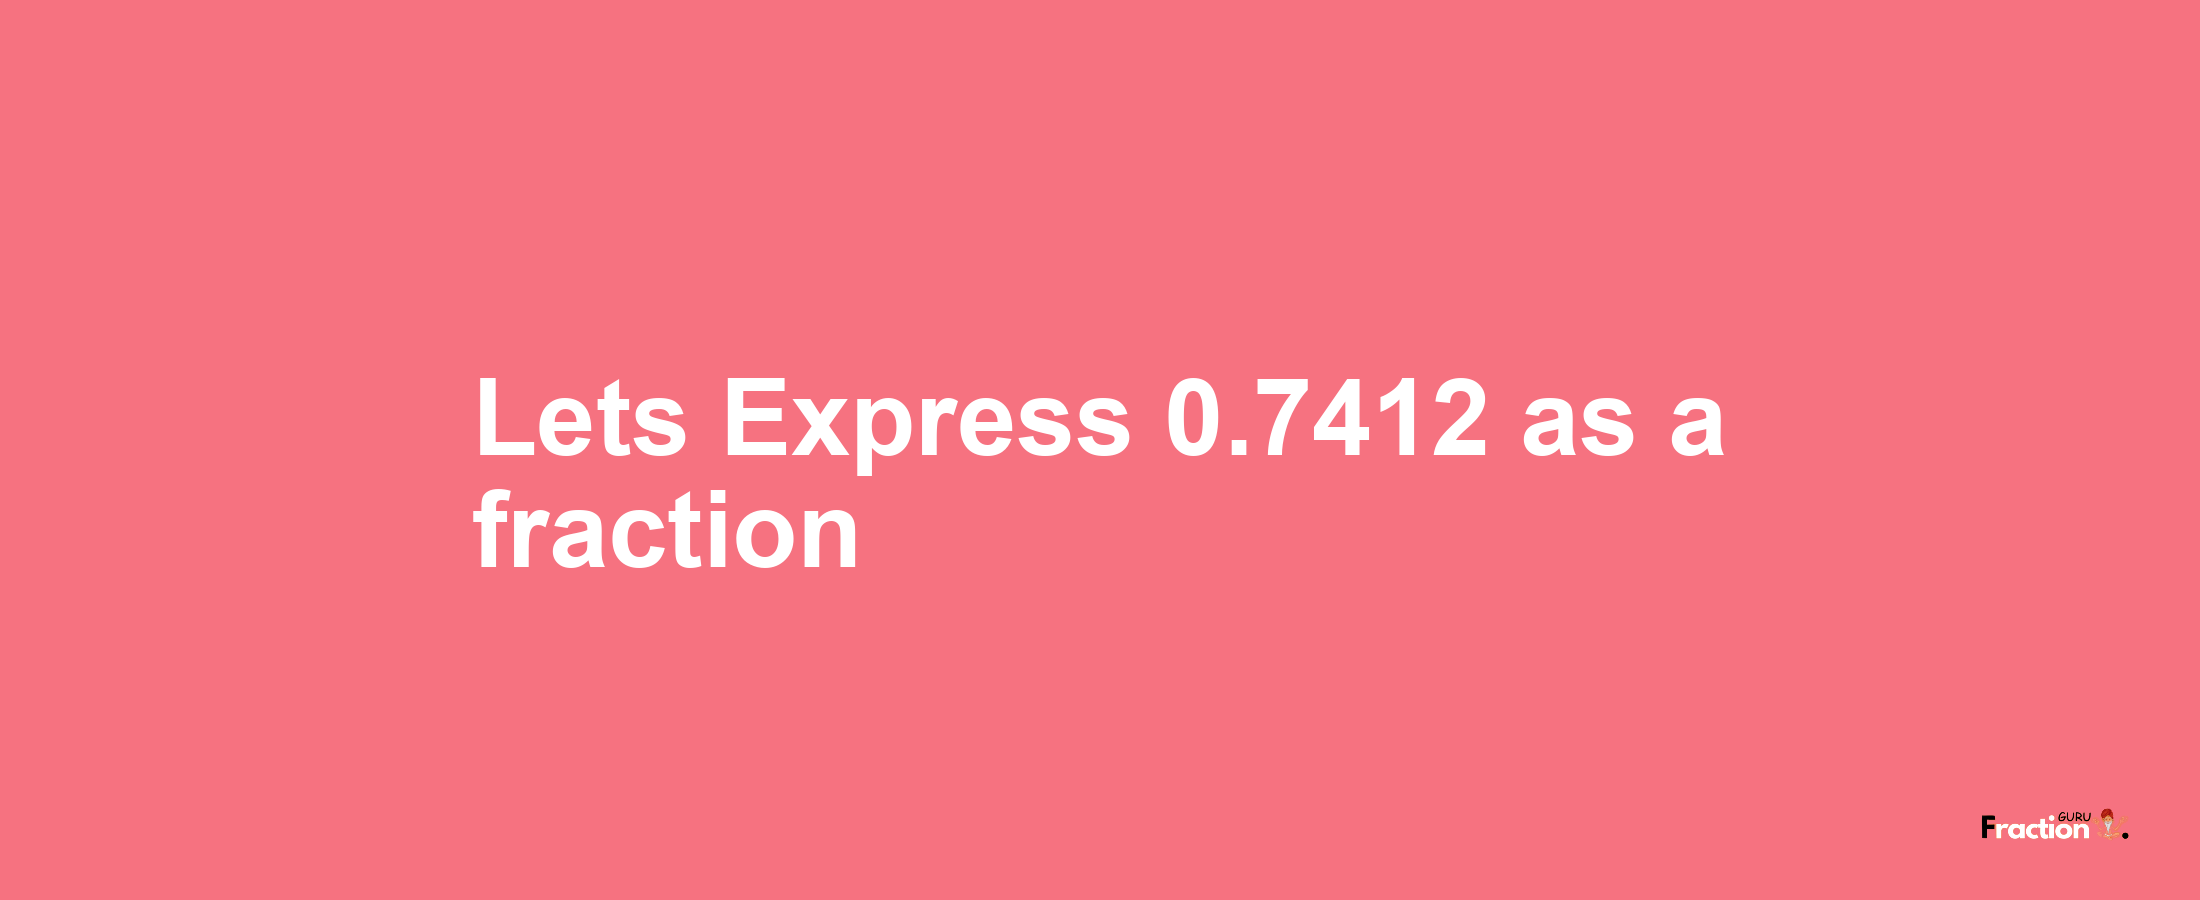 Lets Express 0.7412 as afraction